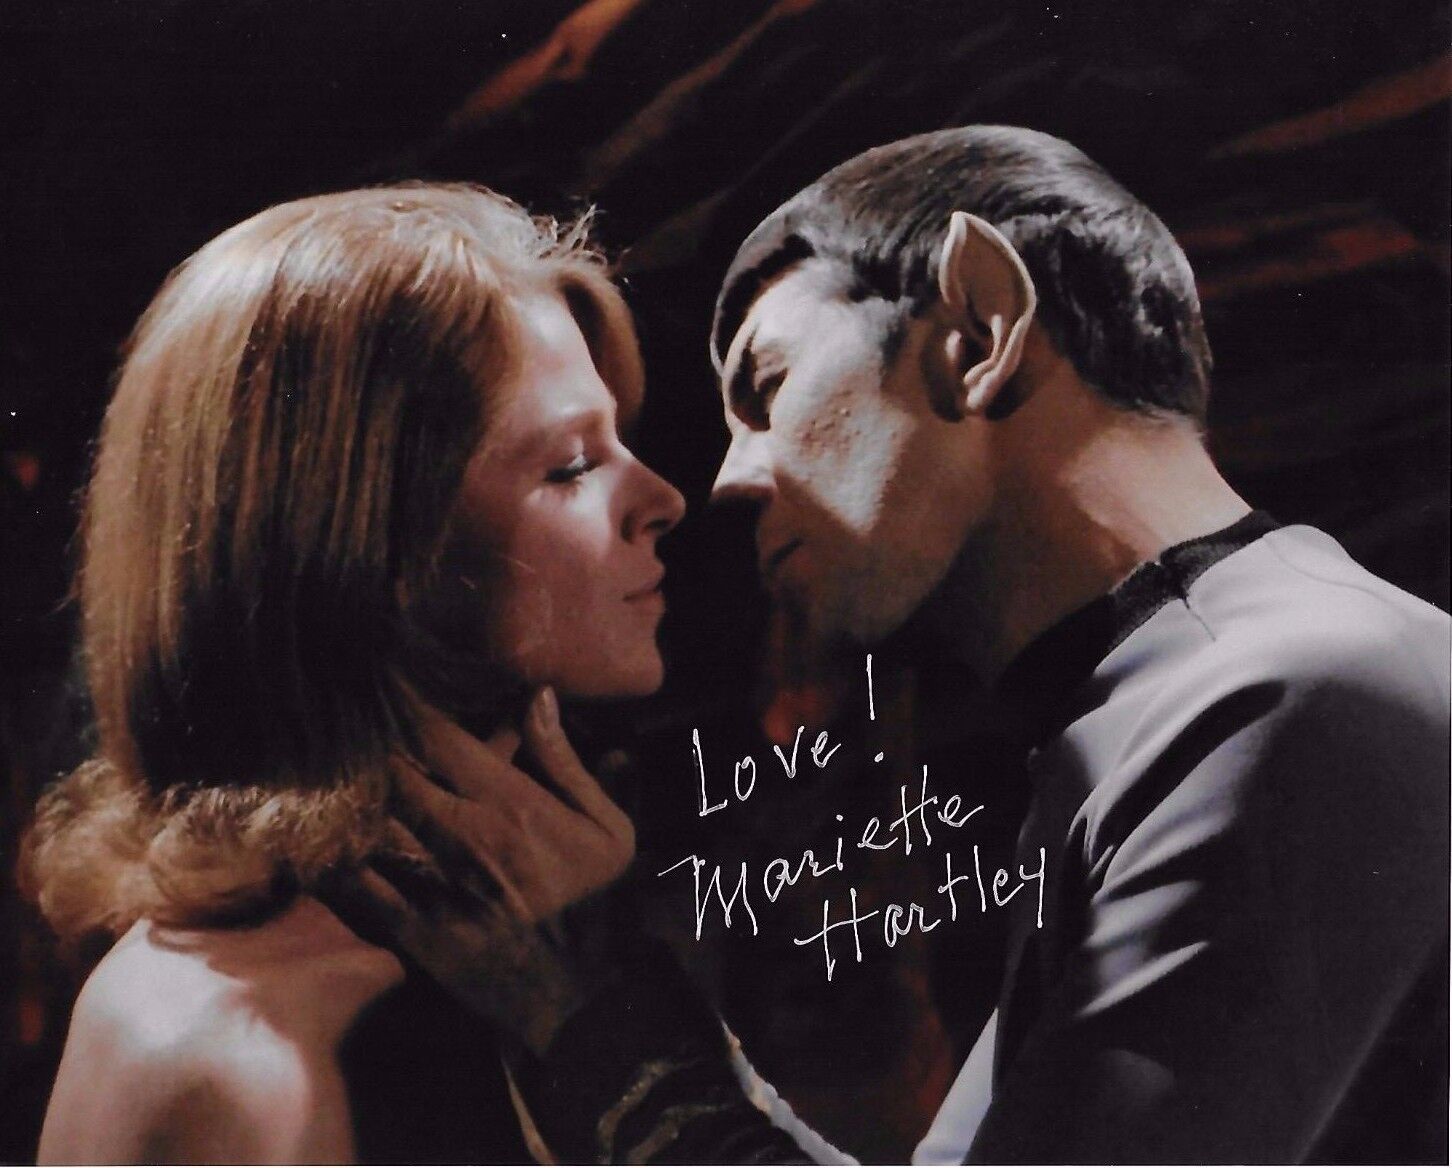 Mariette Hartley Signed 8x10 Photo Poster painting - STAR TREK BABE - ICONIC - BEAUTIFUL!!! H217